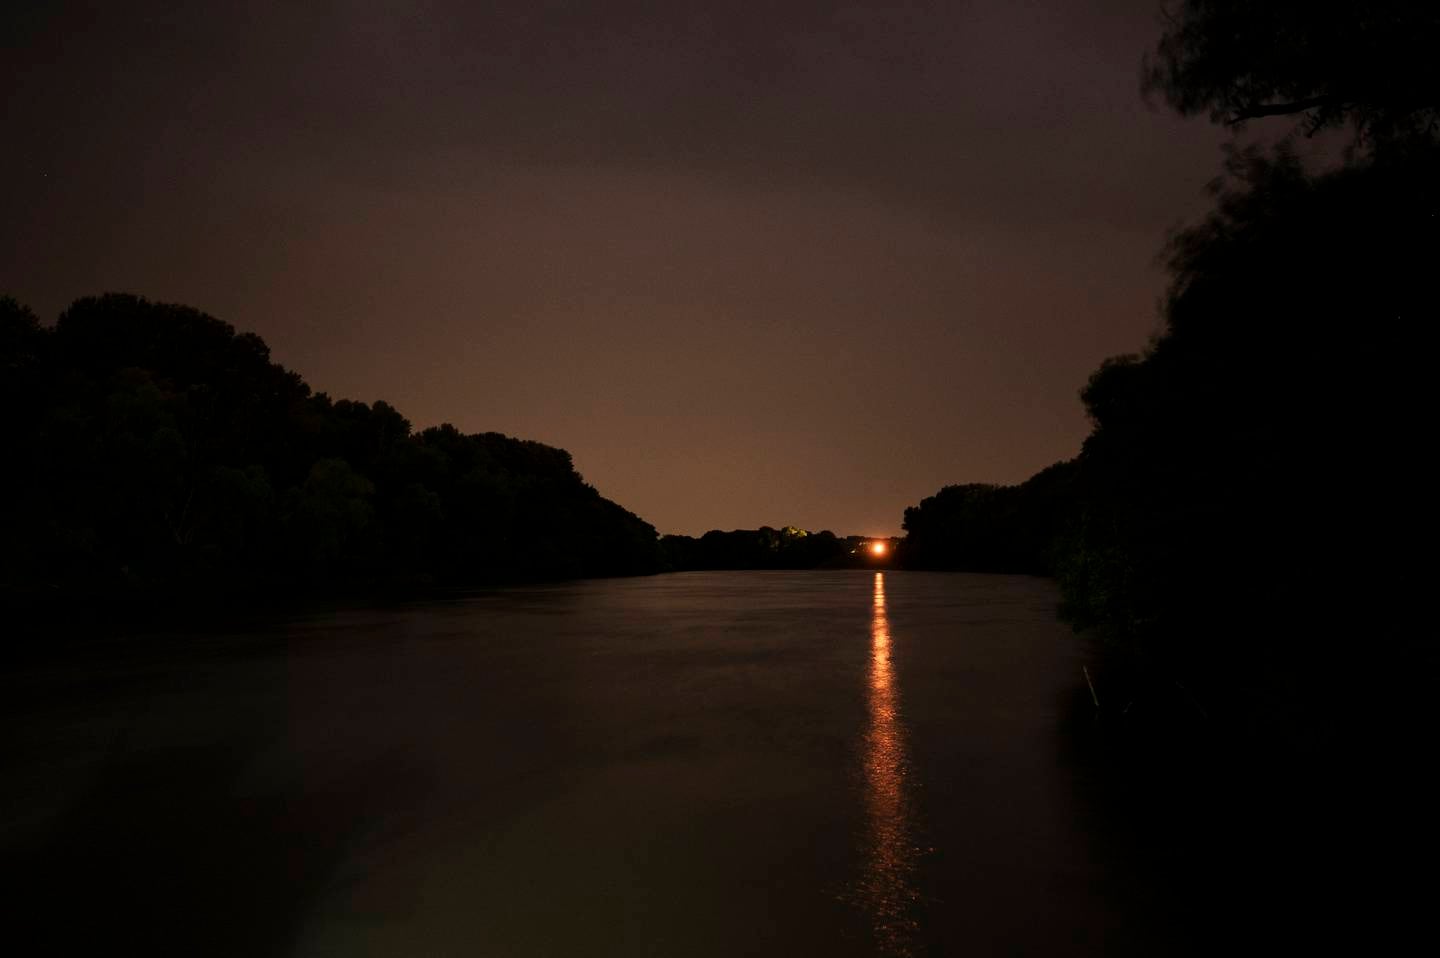 Lights shine at night on the Tisza River near Tiszaroff, Hungary, Tuesday, Aug. 1, 2023. Since its start in 2013, participants in the annual Plastic Cup competition — which offers a prize for those who collect the most trash each year — have gathered more than 330 tons (around 727,000 pounds) of waste from the Tisza and other Hungarian waters. (AP Photo/Denes Erdos)